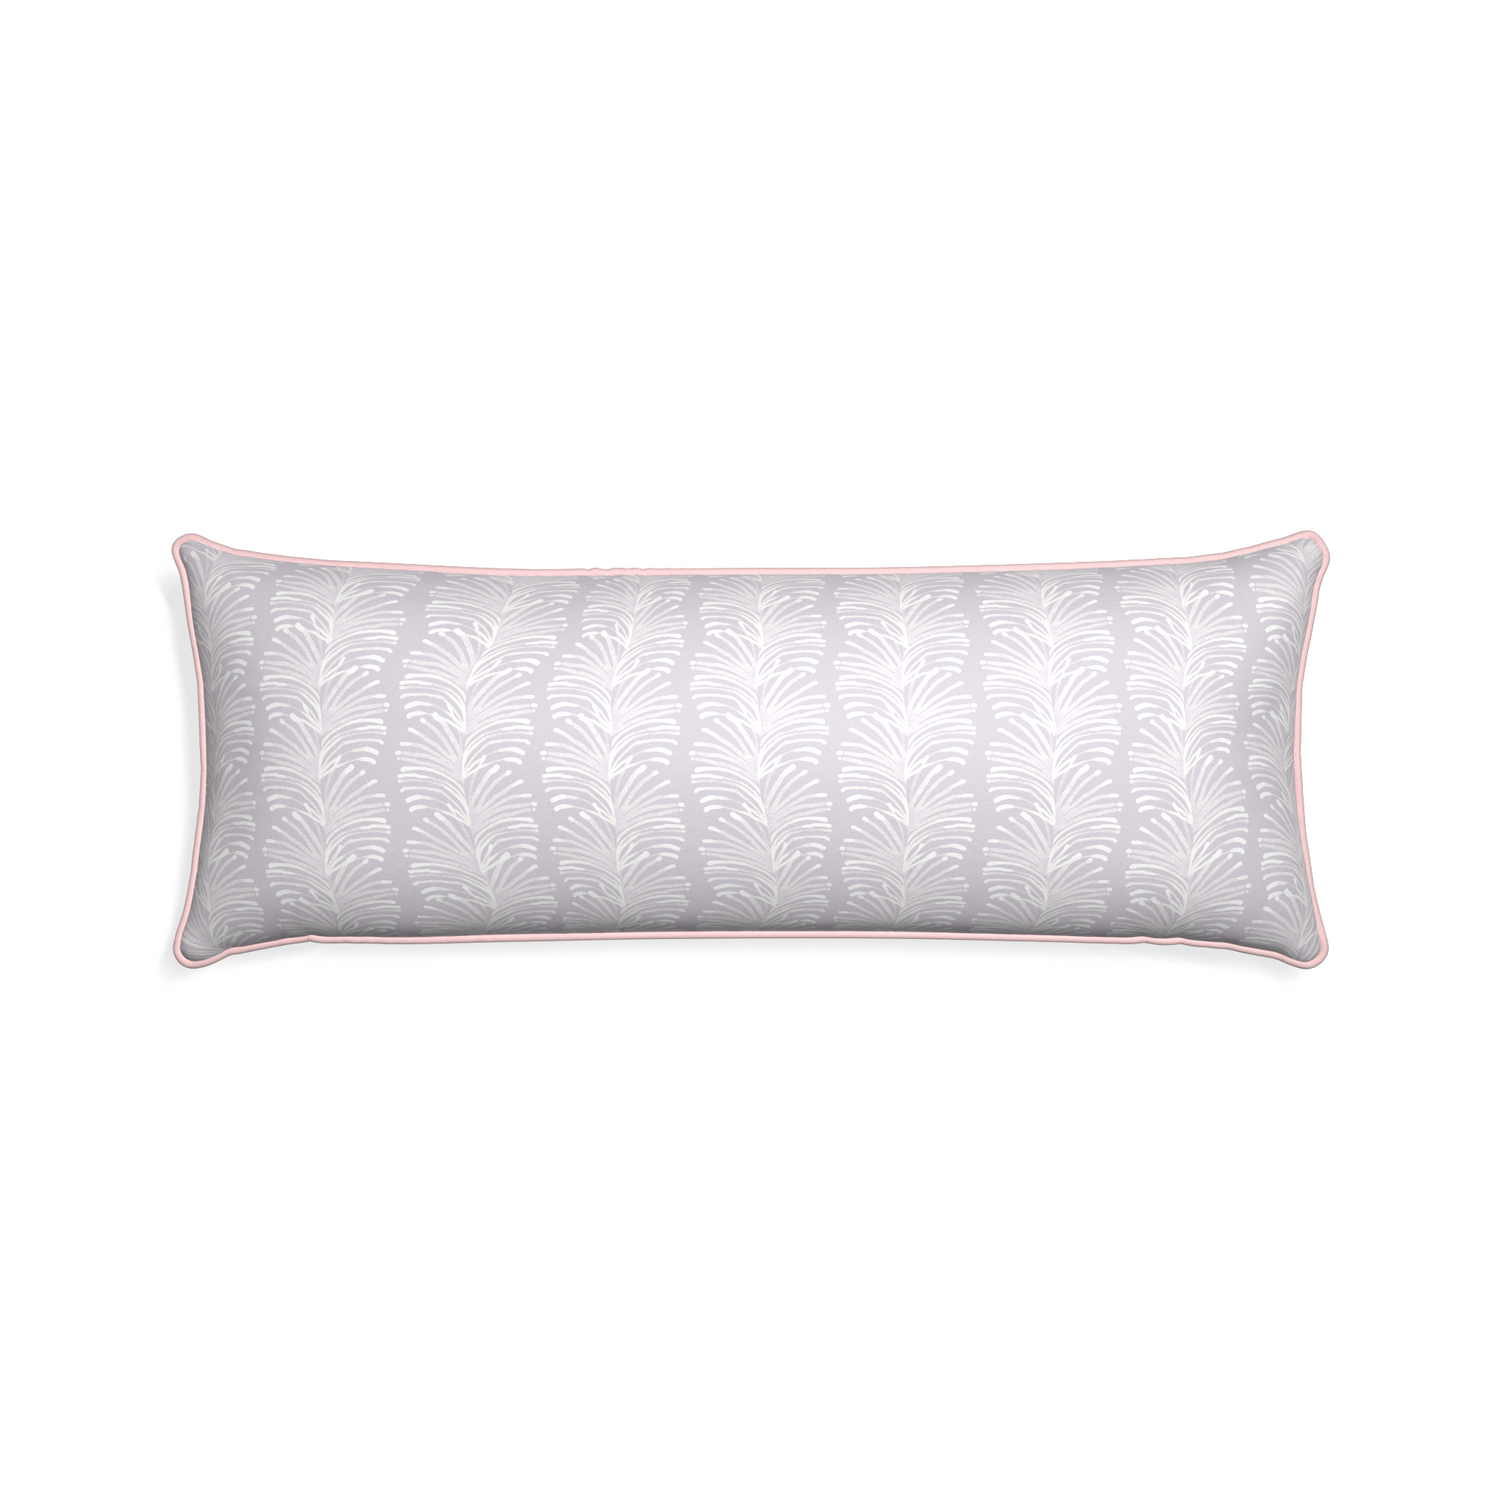 Xl-lumbar emma lavender custom pillow with petal piping on white background